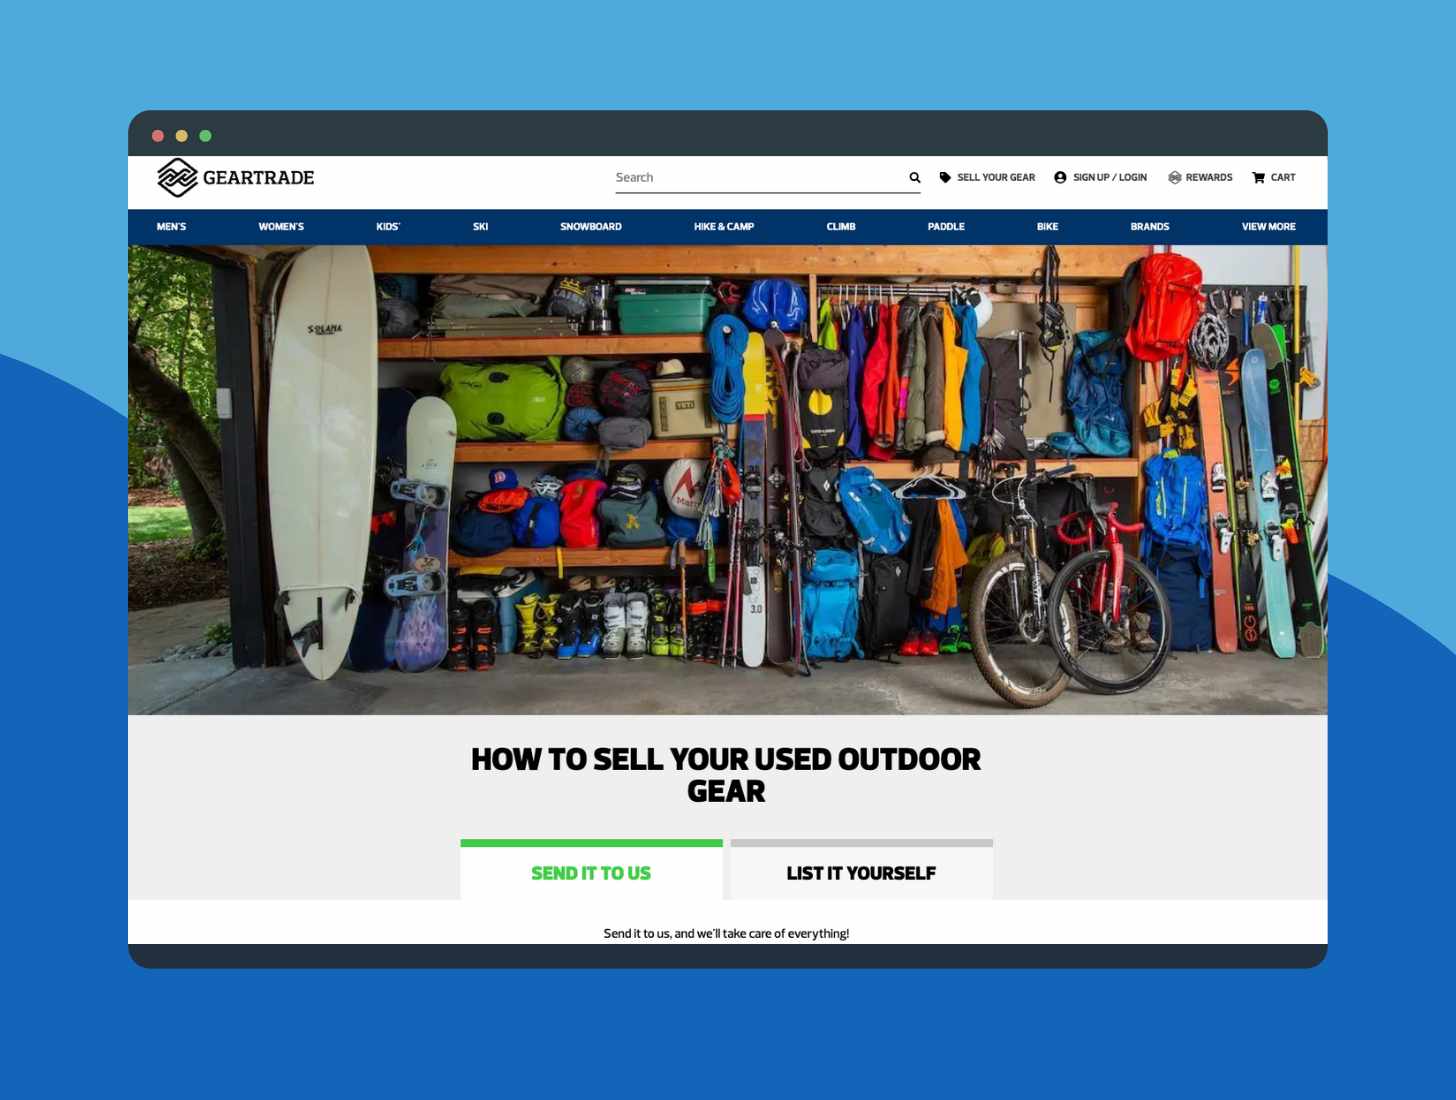 Geartrade Website: How To Sell Your Used Outdoor Gear: Send it to us. List it yourself.